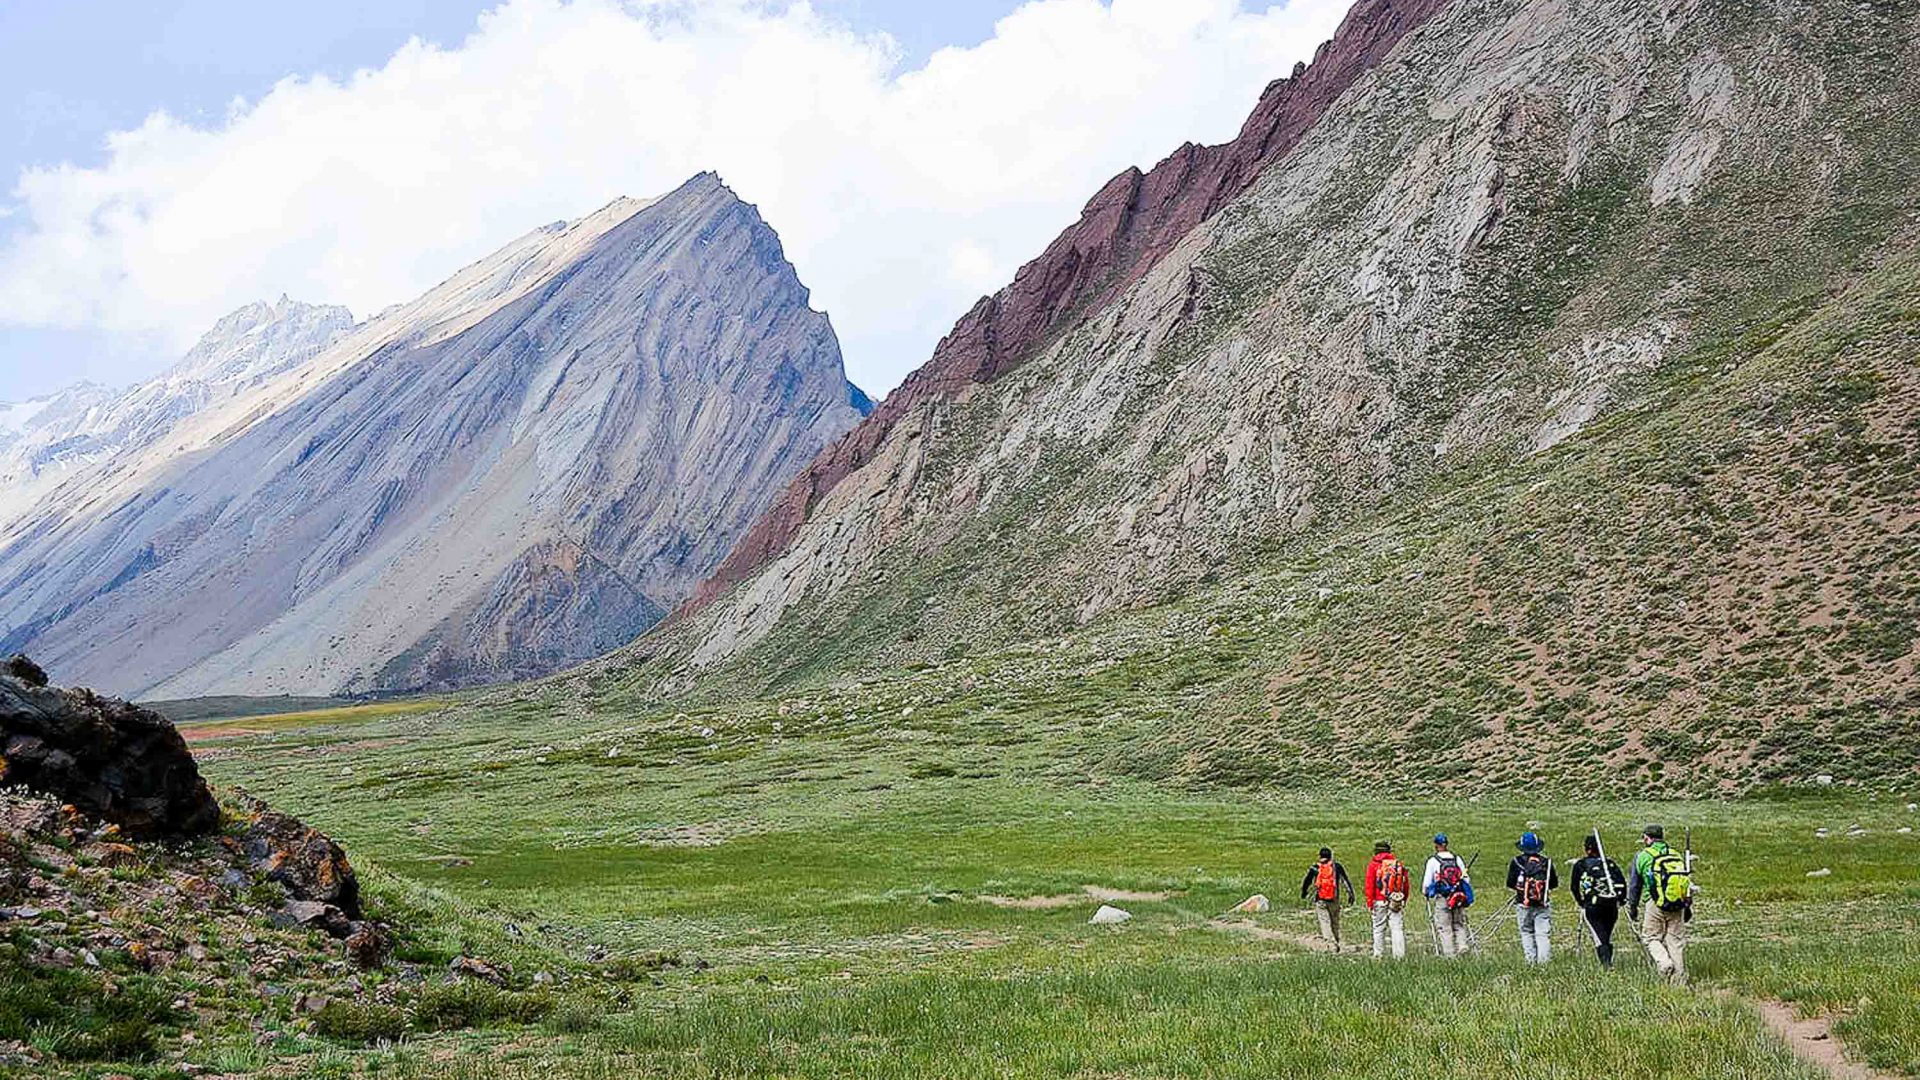 Hikers walking up a green valley.